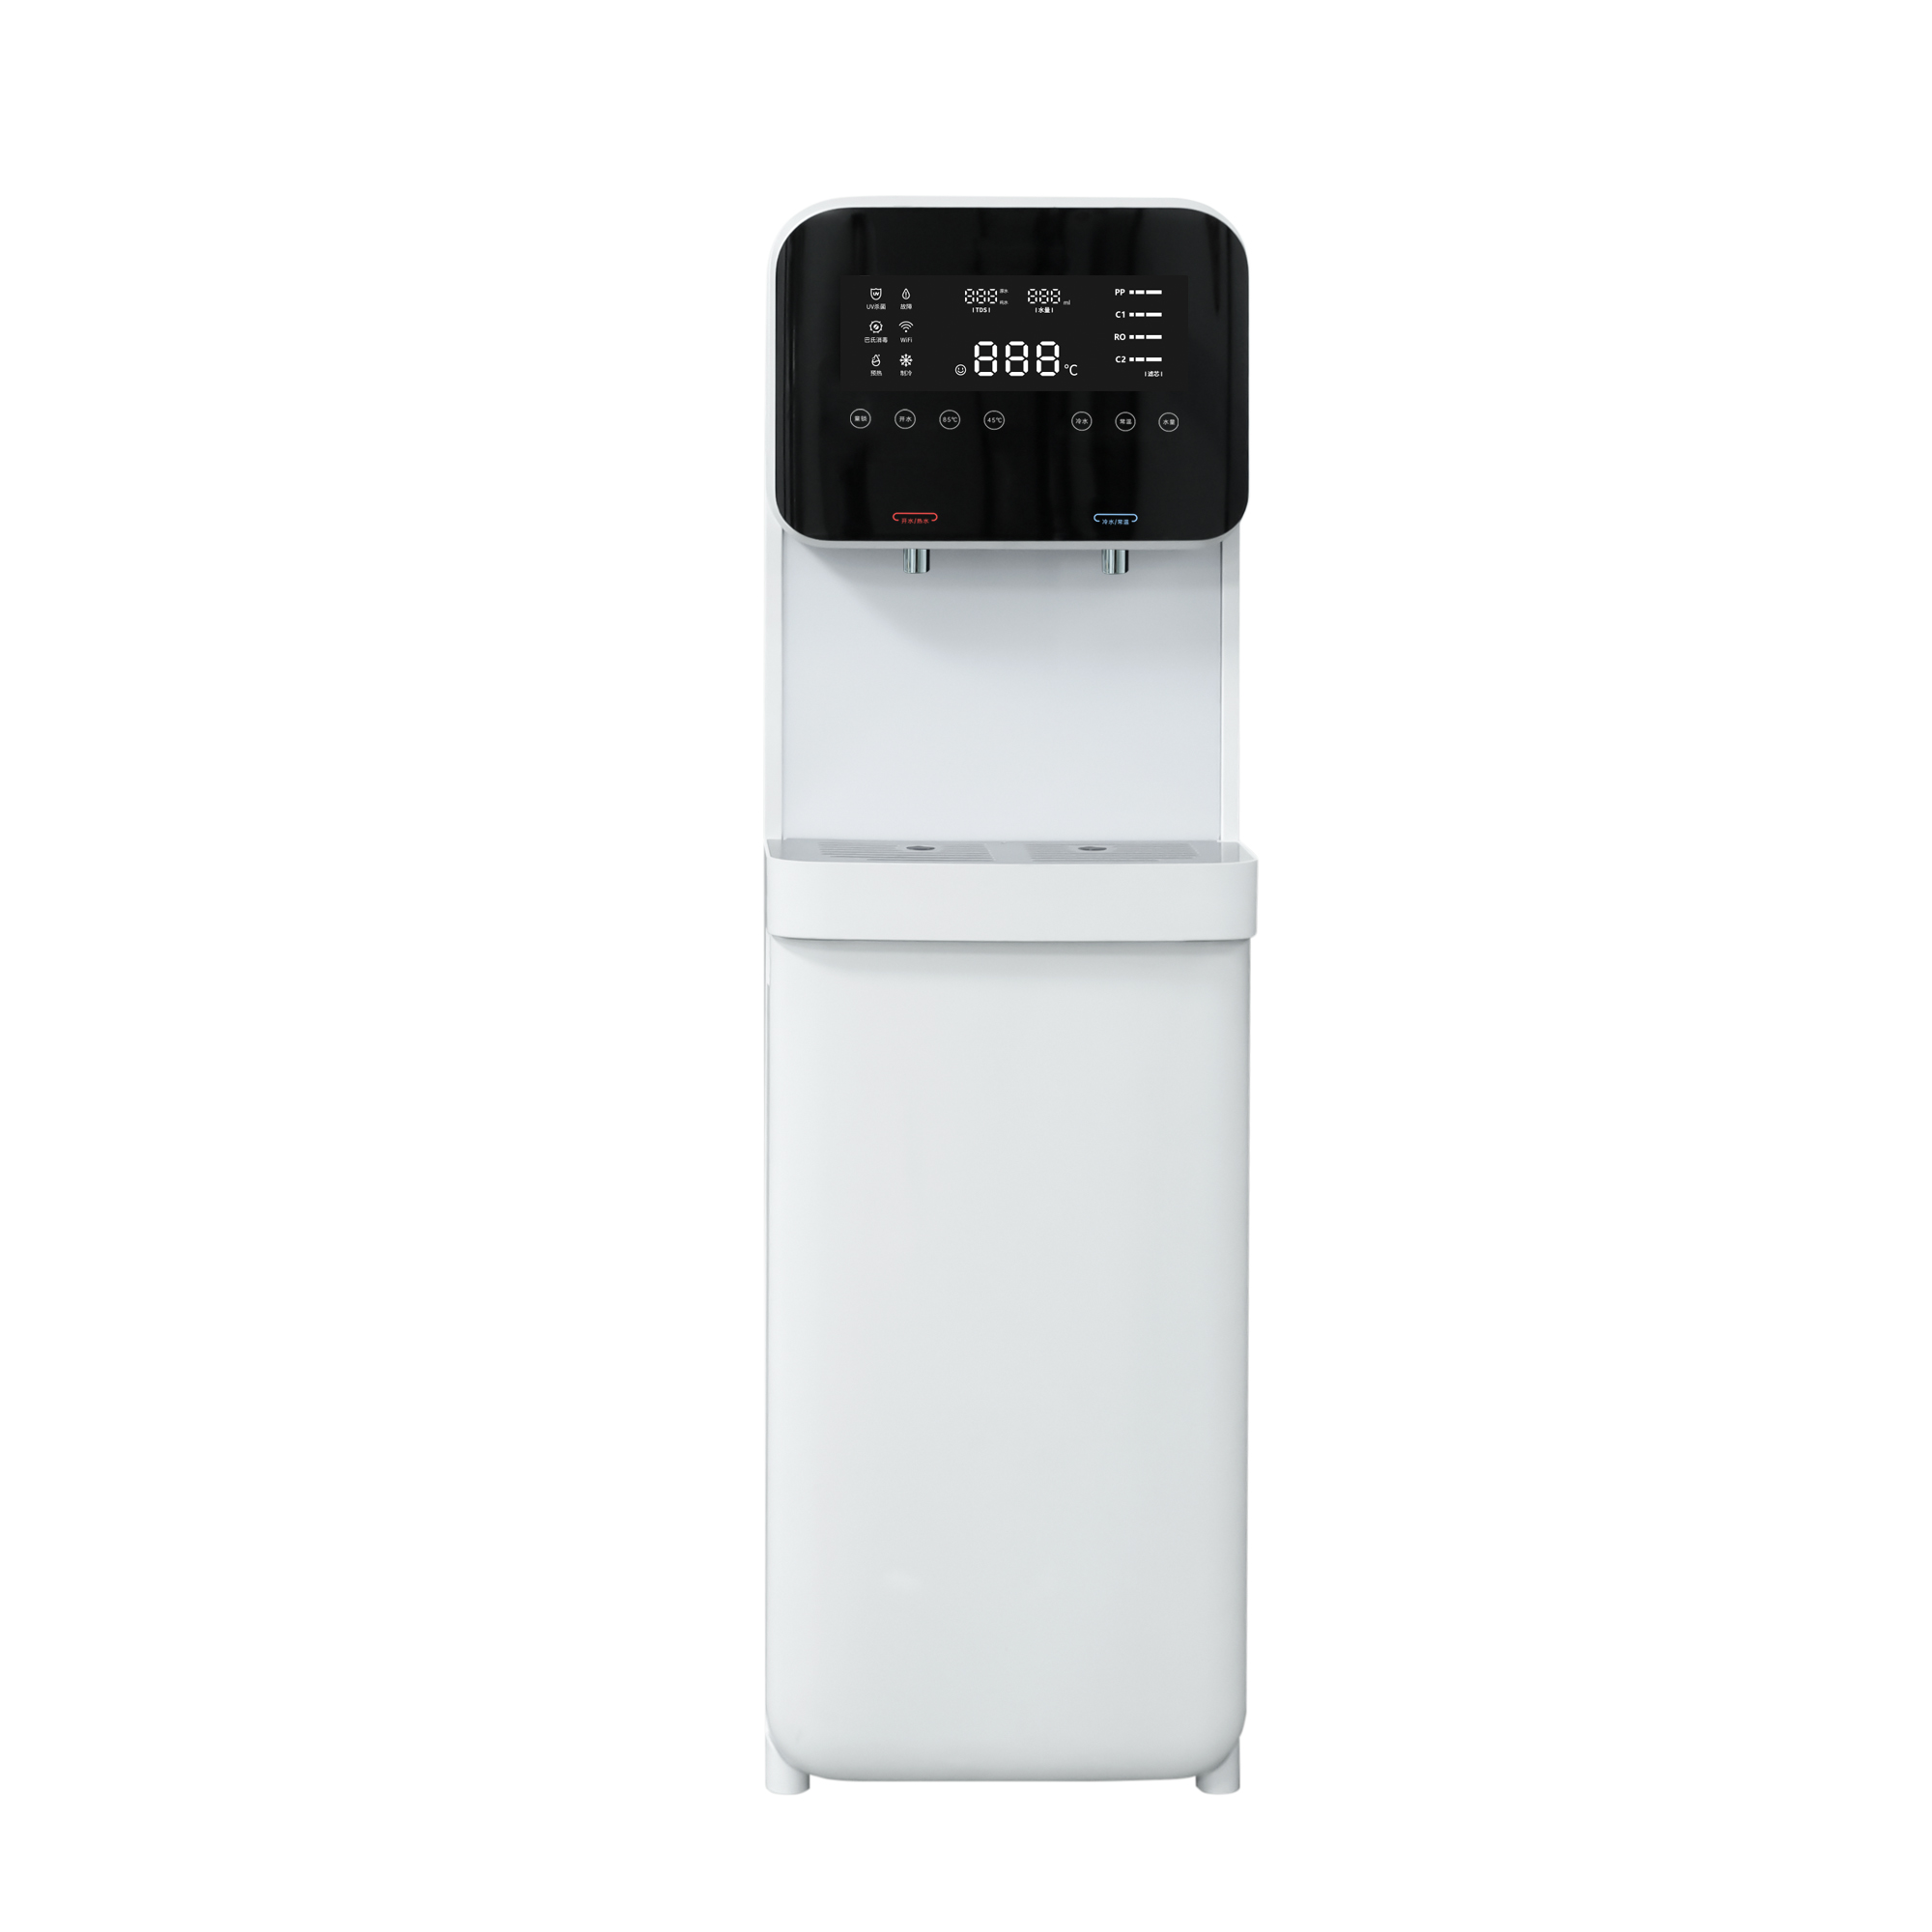 https://www.filterpur.com/standing-hot-and-cold-water-dispenser-with-4-stage-water-filter-product/